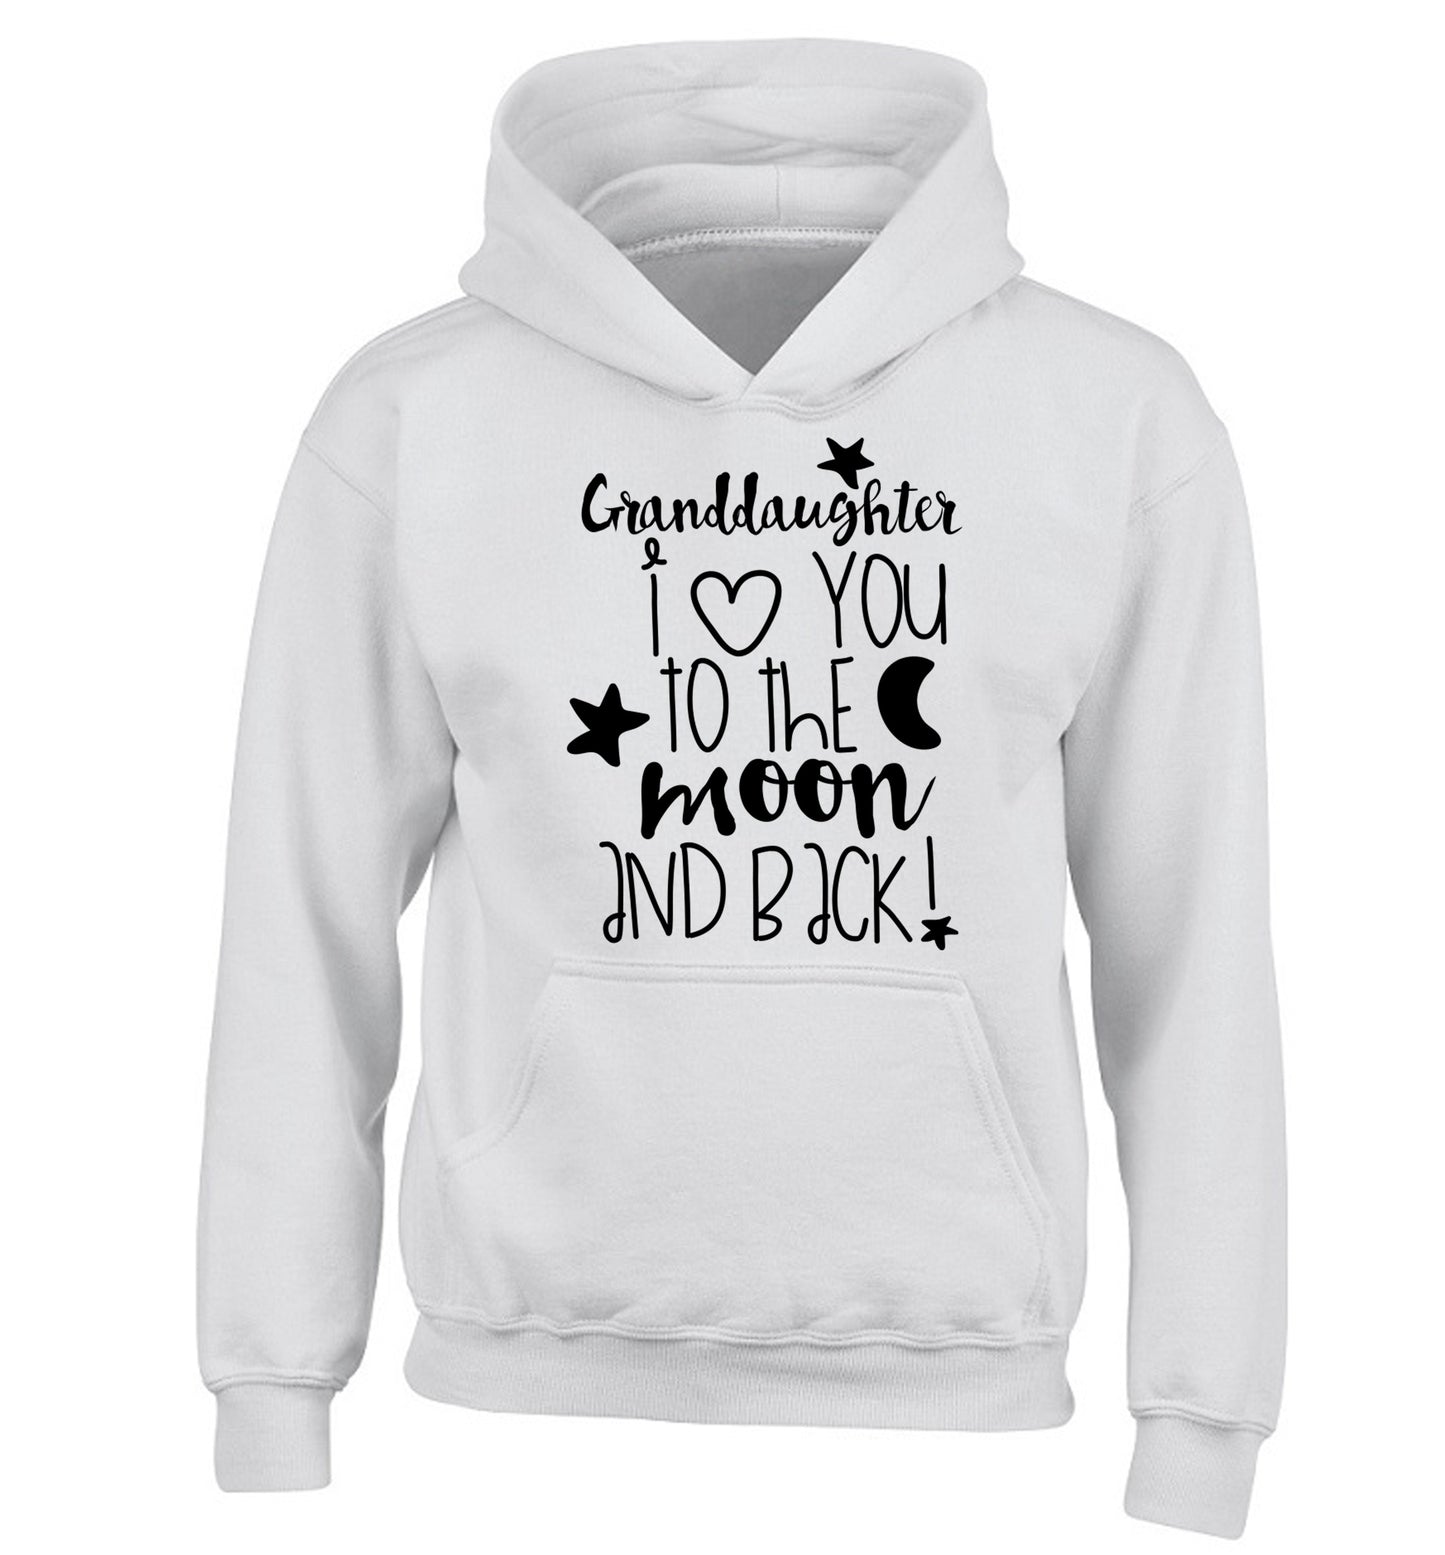 Granddaughter I love you to the moon and back children's white hoodie 12-14 Years